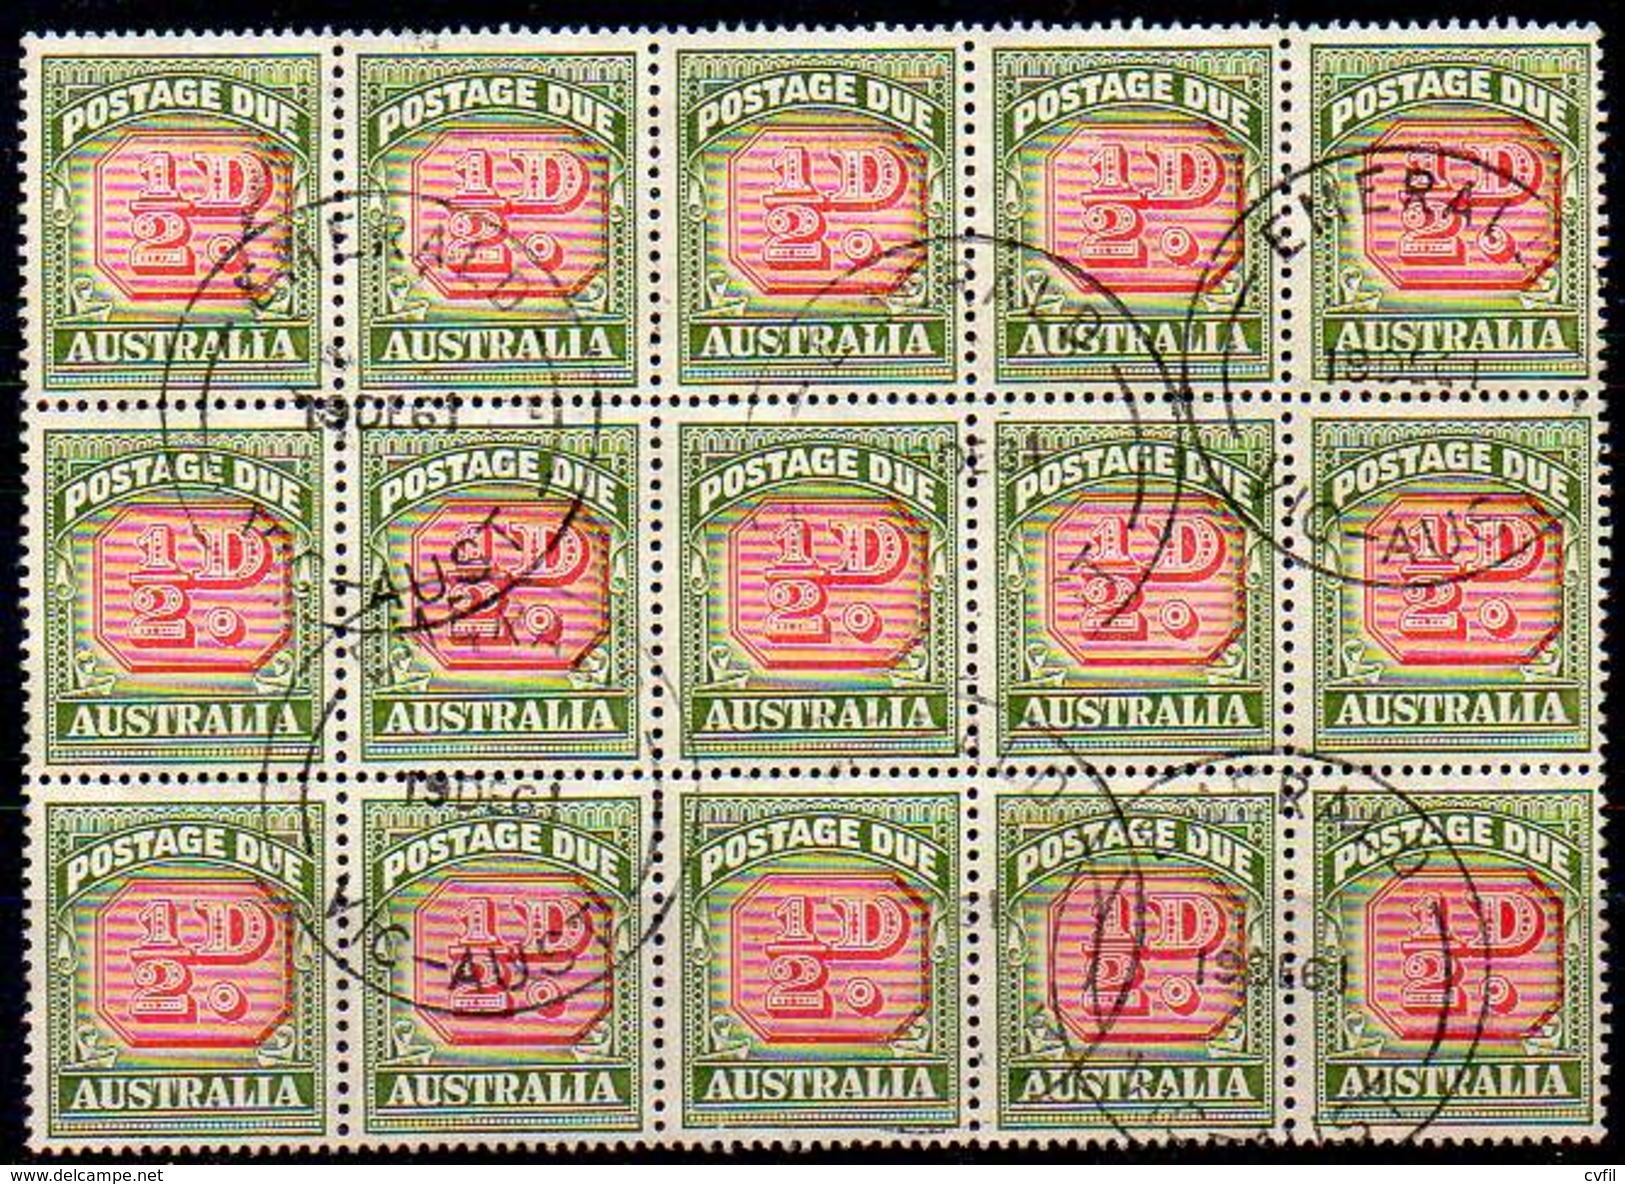 AUSTRALIA 1958. Block Of 15 Of The ½D Postage Due, Very Fine Used - Sheets, Plate Blocks &  Multiples